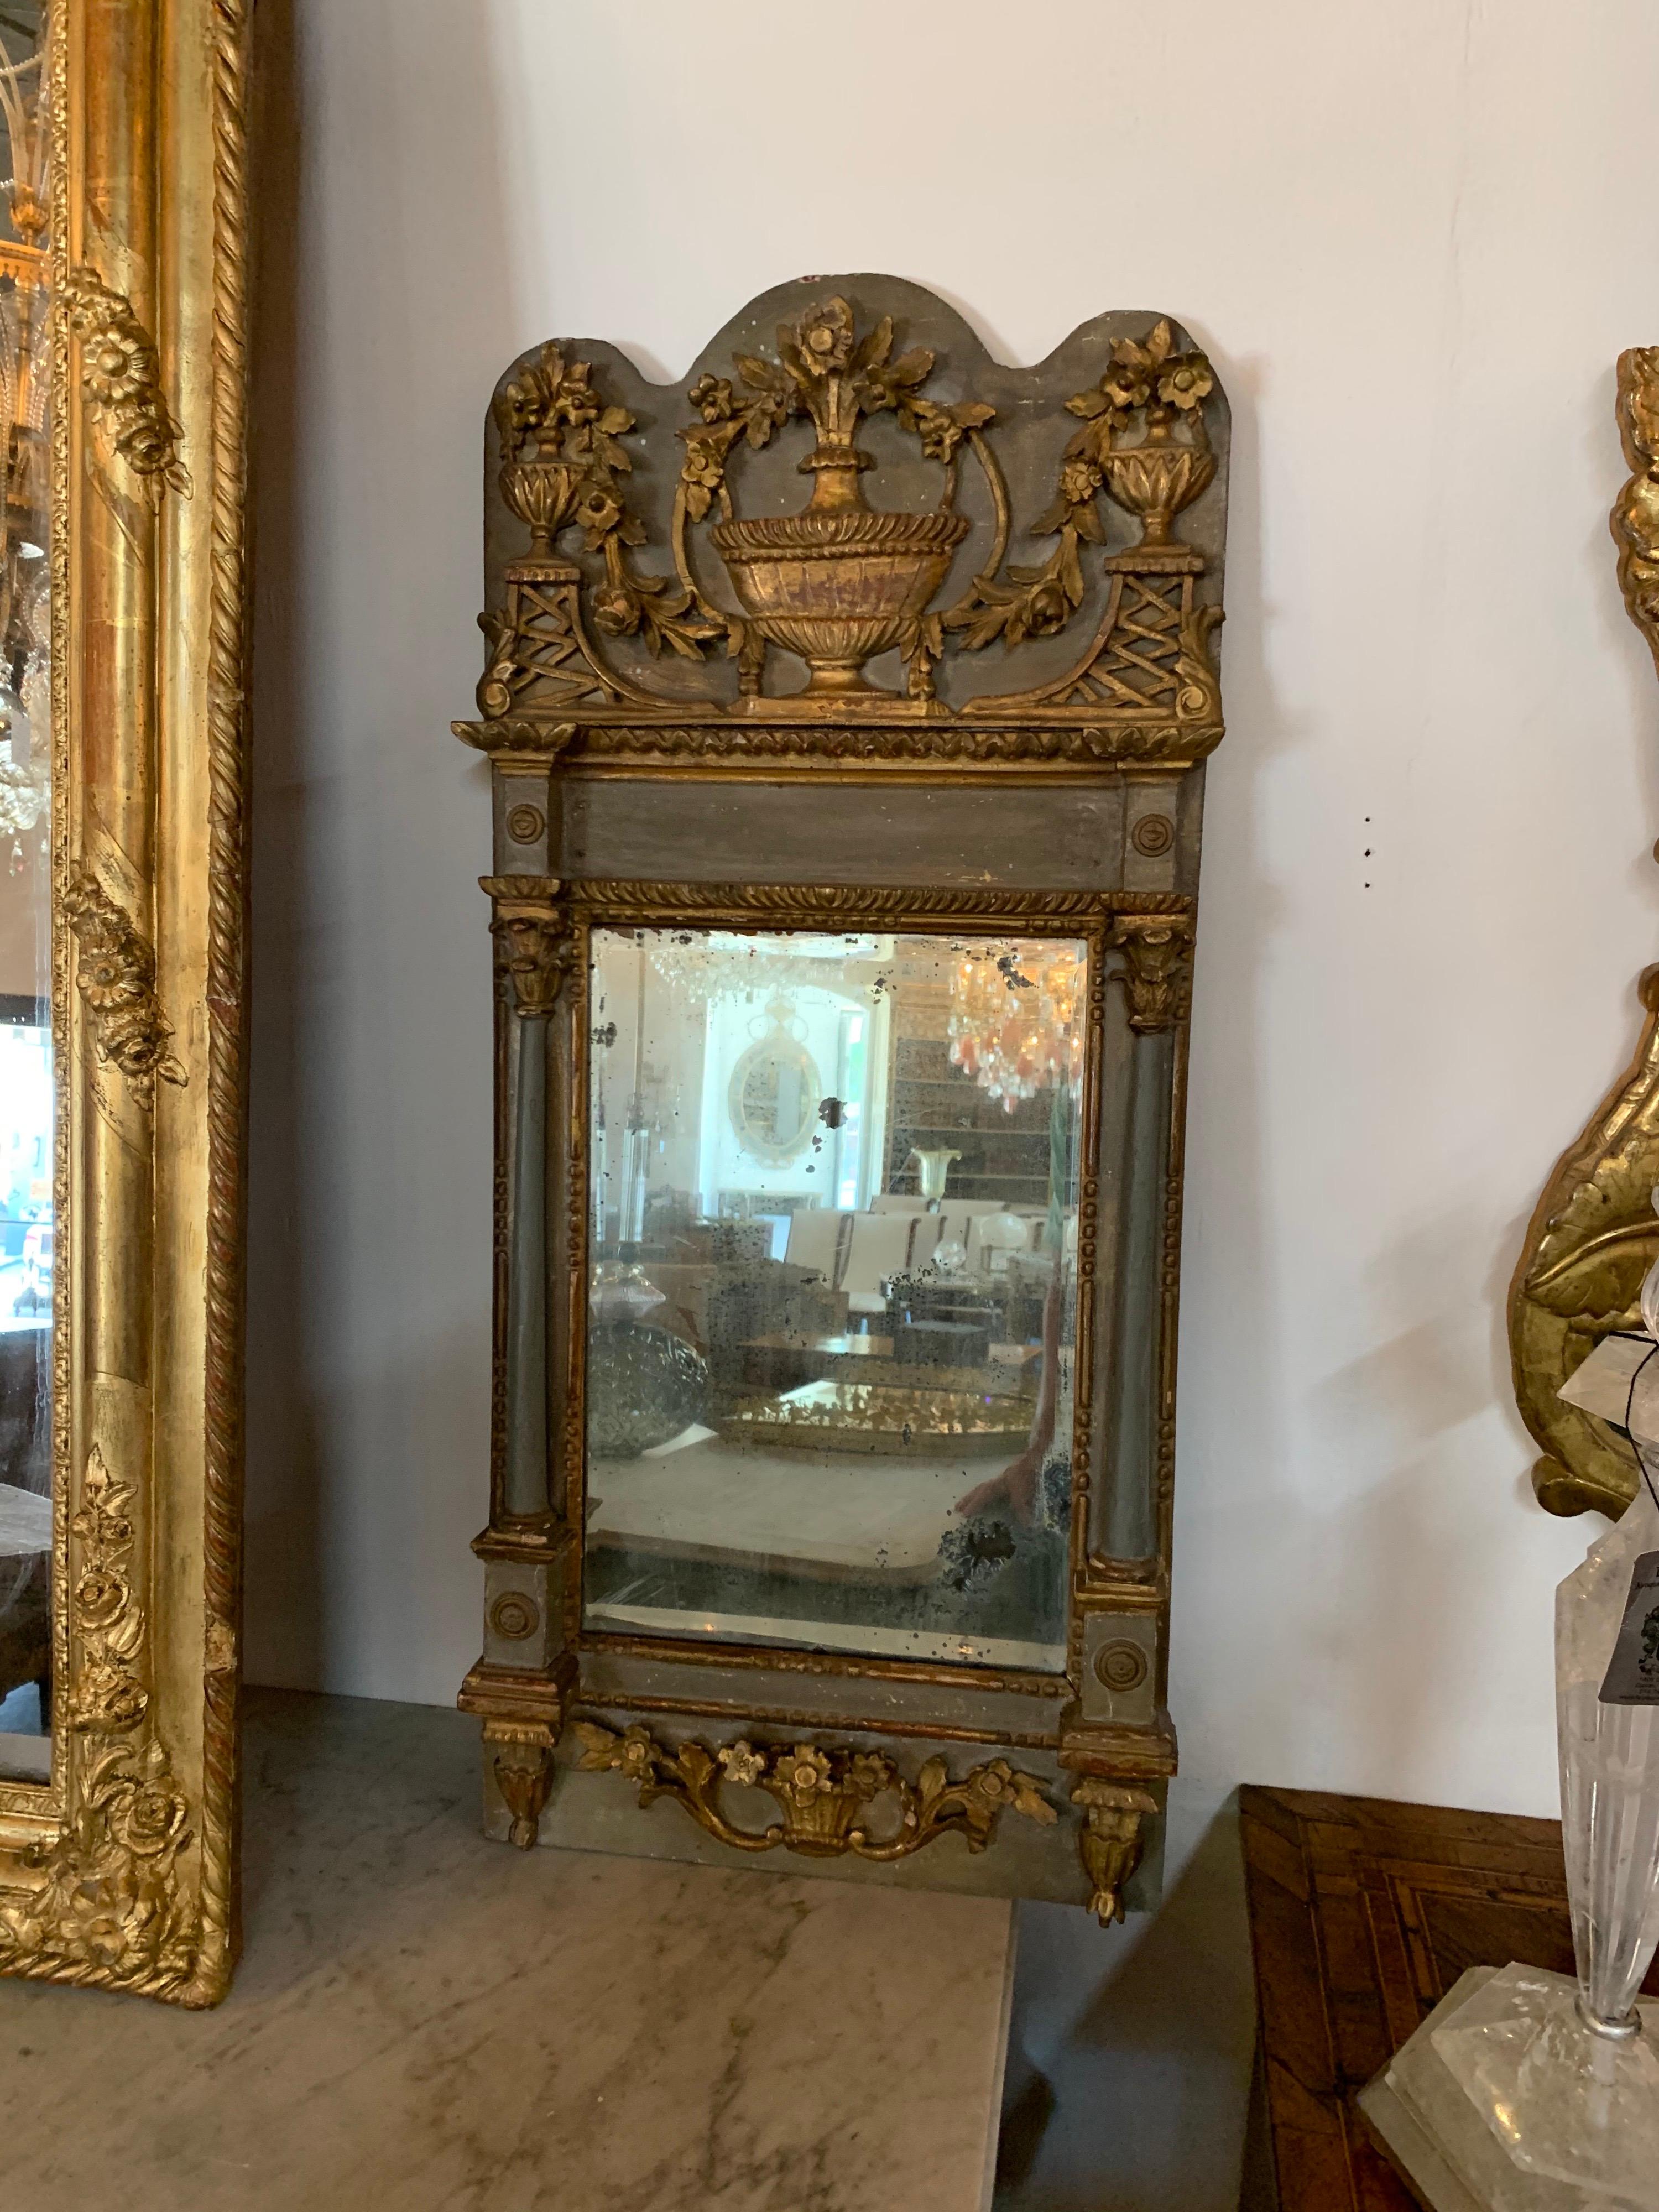 Very fine 18th century Italian carved and parcel gilt mirror with original mercury glass. Exceptional carvings including floral images and urns. Great patina as well!